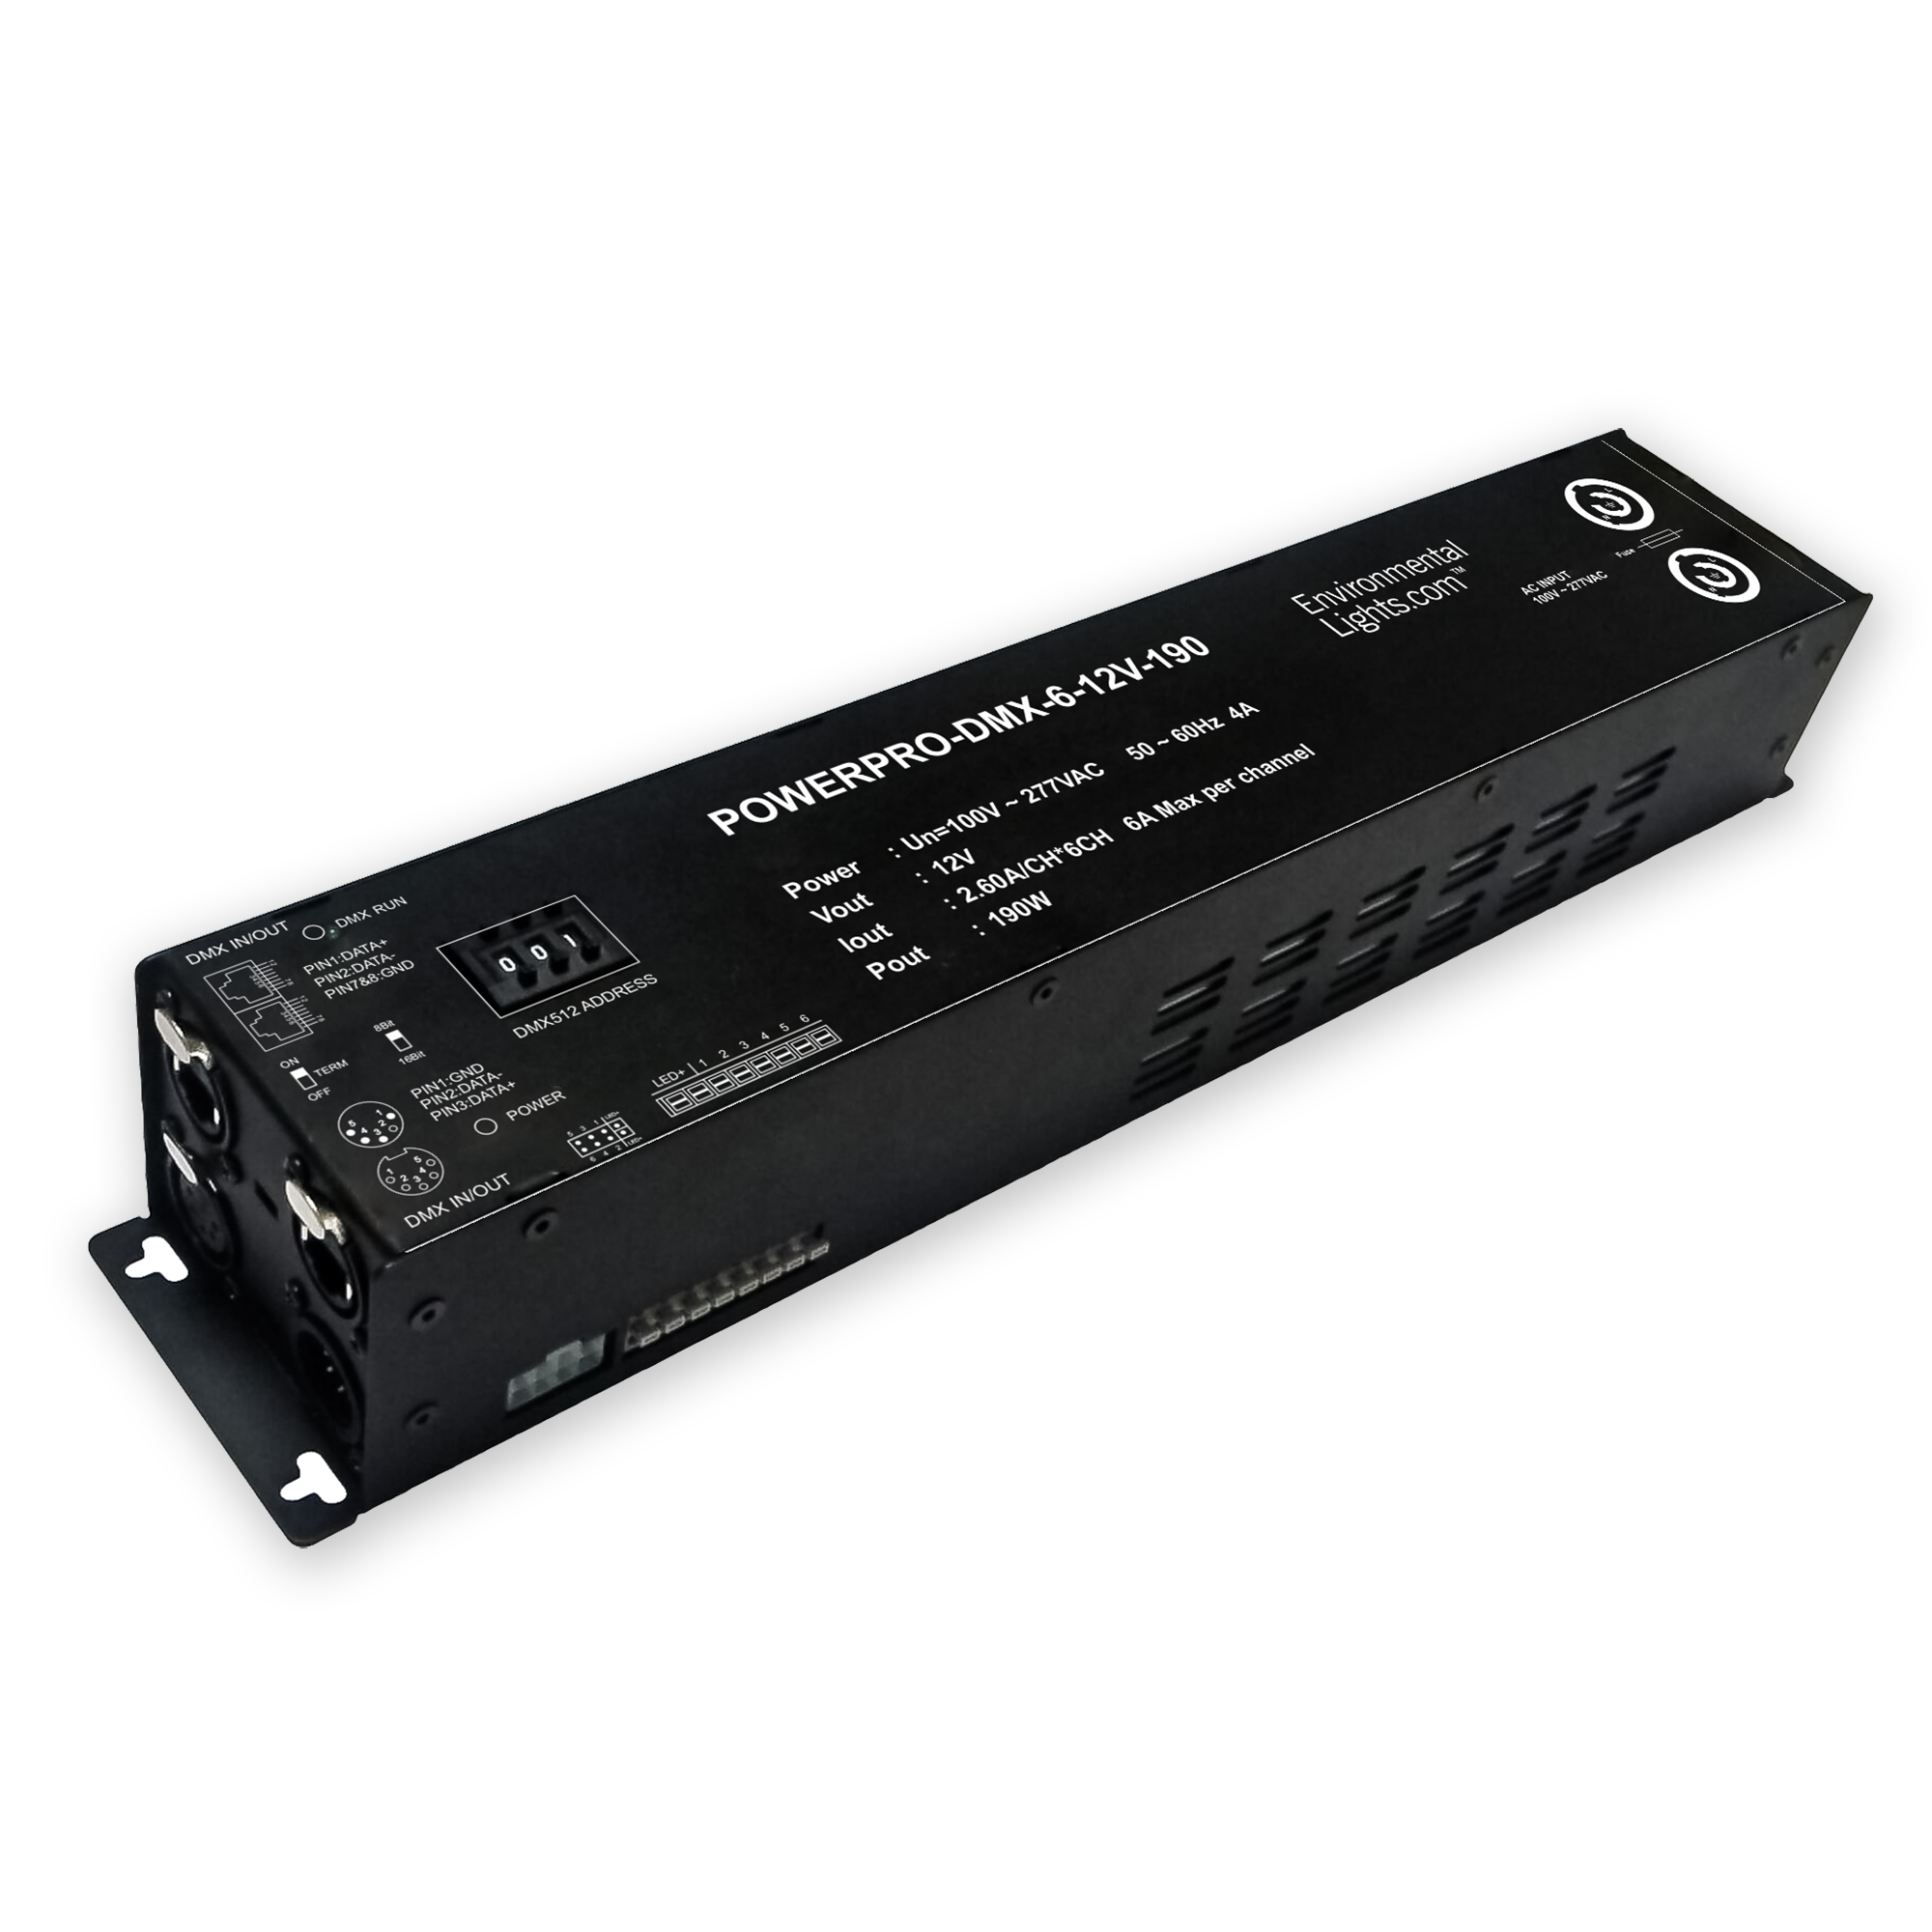 PowerPro: Self-Contained 6 Channel DMX Decoder and Power Supply from Environmental Lights